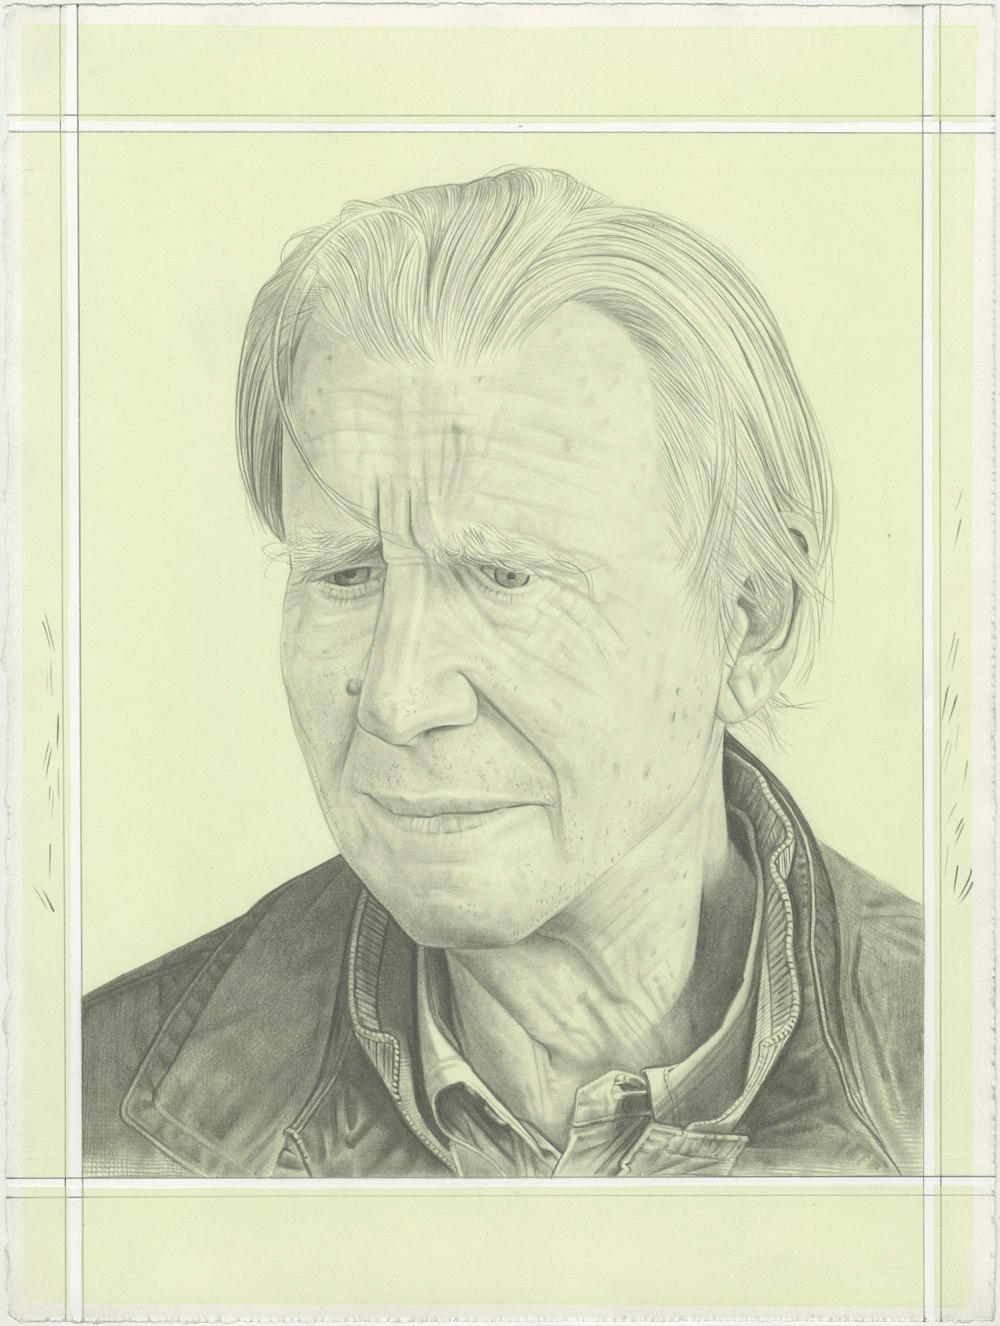 Portrait of Brian O'Doherty. Pencil on Paper by Phong H. Bui, from a portrait by Fionn McCann.